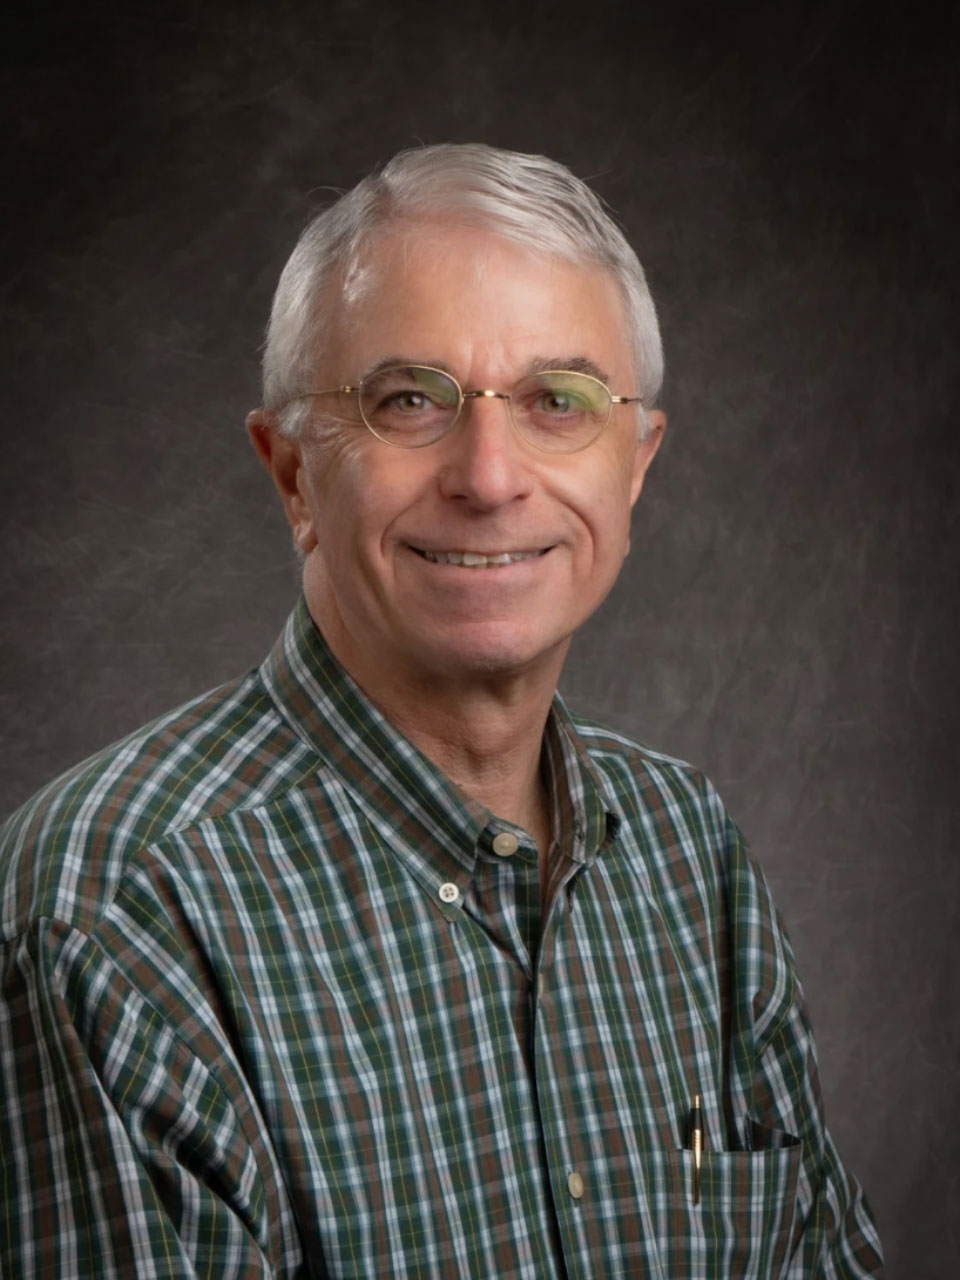 A person with short gray hair, glasses, and a green checkered shirt smiles at the viewer.